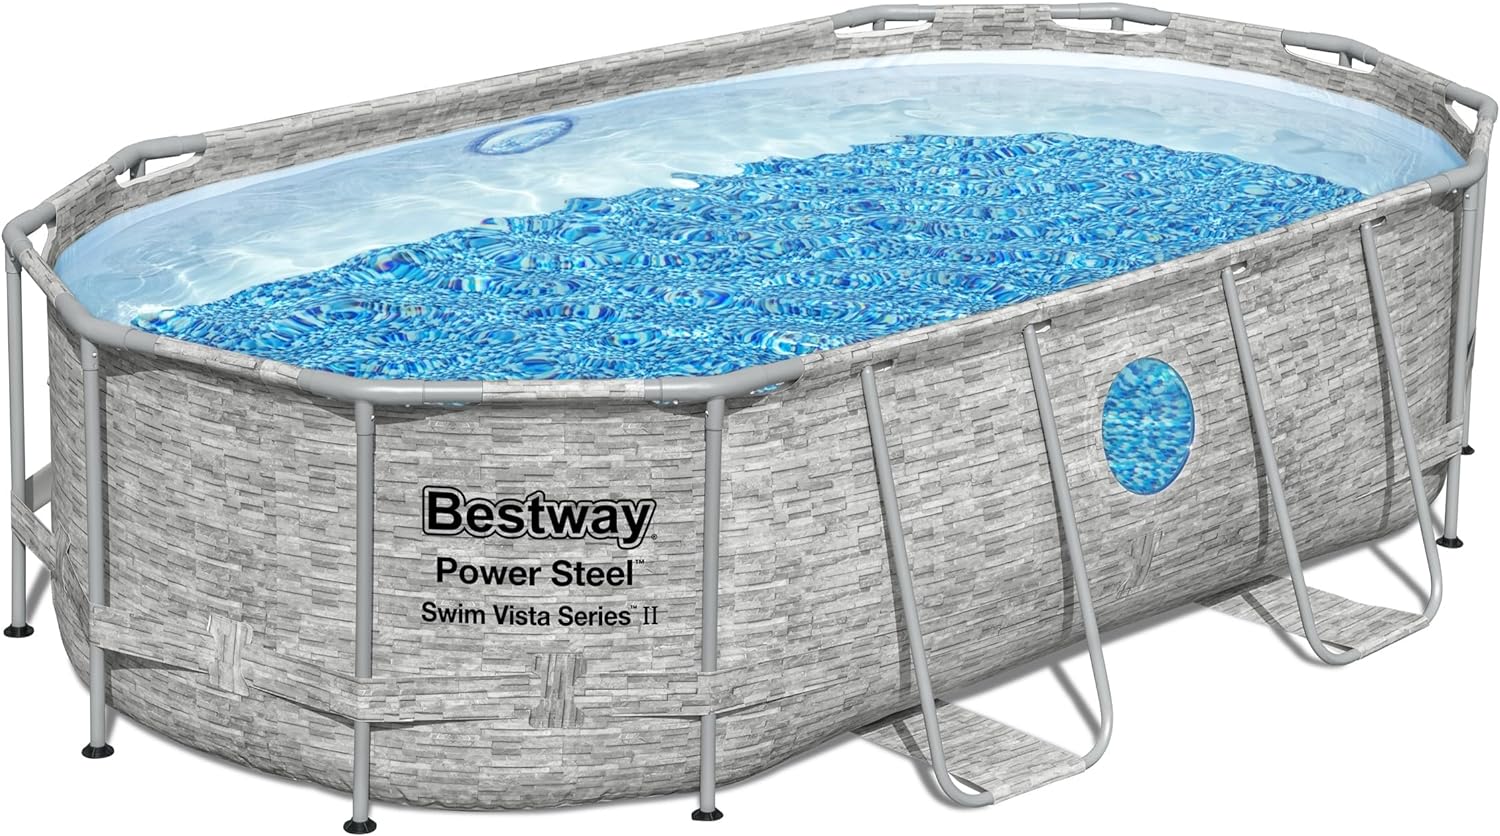 I recently purchased the Bestway Power Steel Swim Vista Series II above ground pool set, and I am extremely pleased with my purchase. The pool itself measures 14' x 8'2 x 39.5 and has a grey stone design, which adds a stylish touch to my backyard.First and foremost, the quality of this pool is exceptional. The steel frame is sturdy and durable, providing excellent stability. I was impressed by how well it held up even with several people using it at once. The material used for the pool liner i